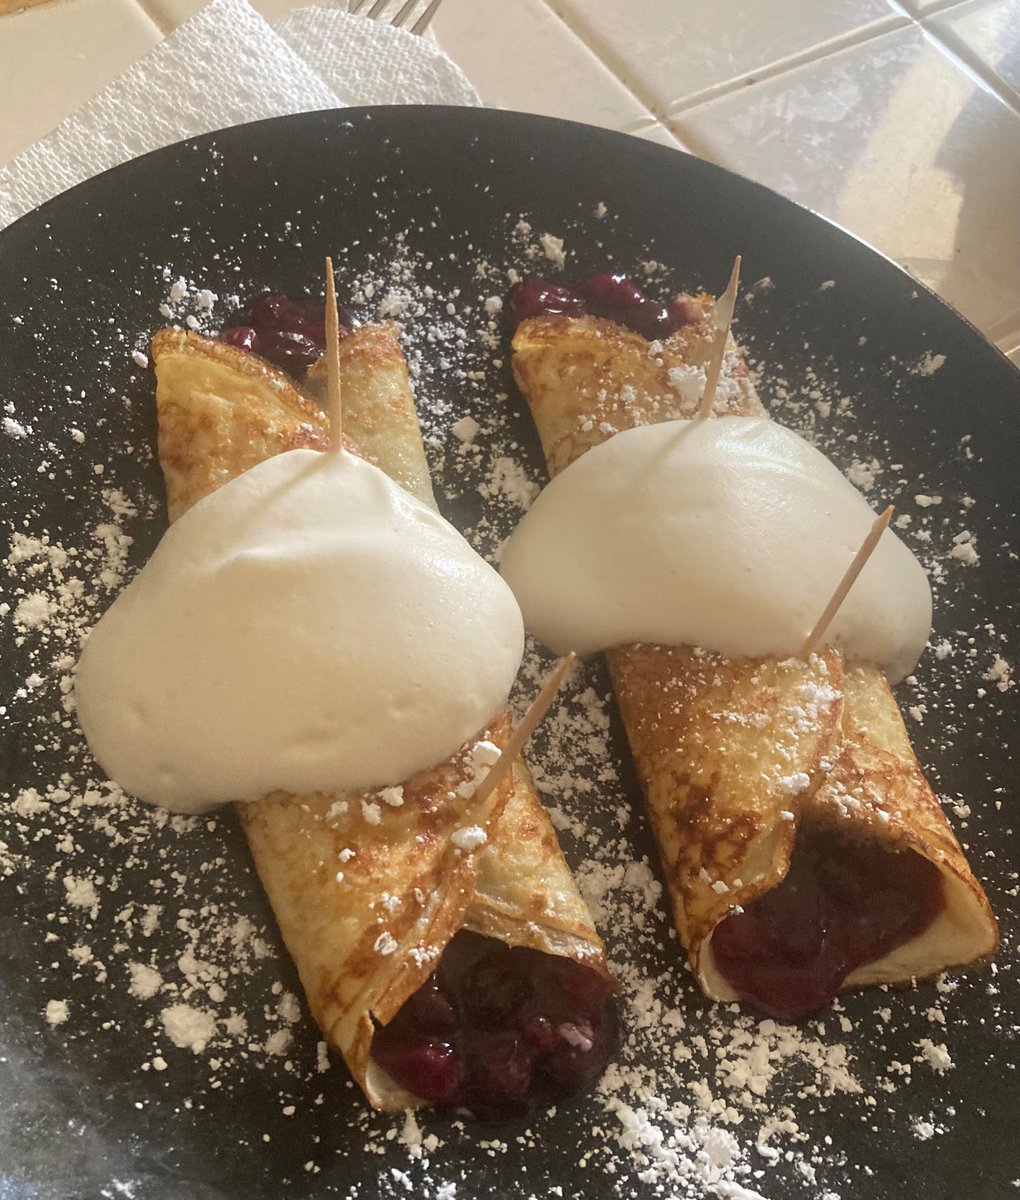 I have officially shocked the caca outta m’self… my strawblue-berry crépes actually turned out quite délicieux! 🥞 #MiraclesHappen 

Have had waaay too much coffee today 🫢